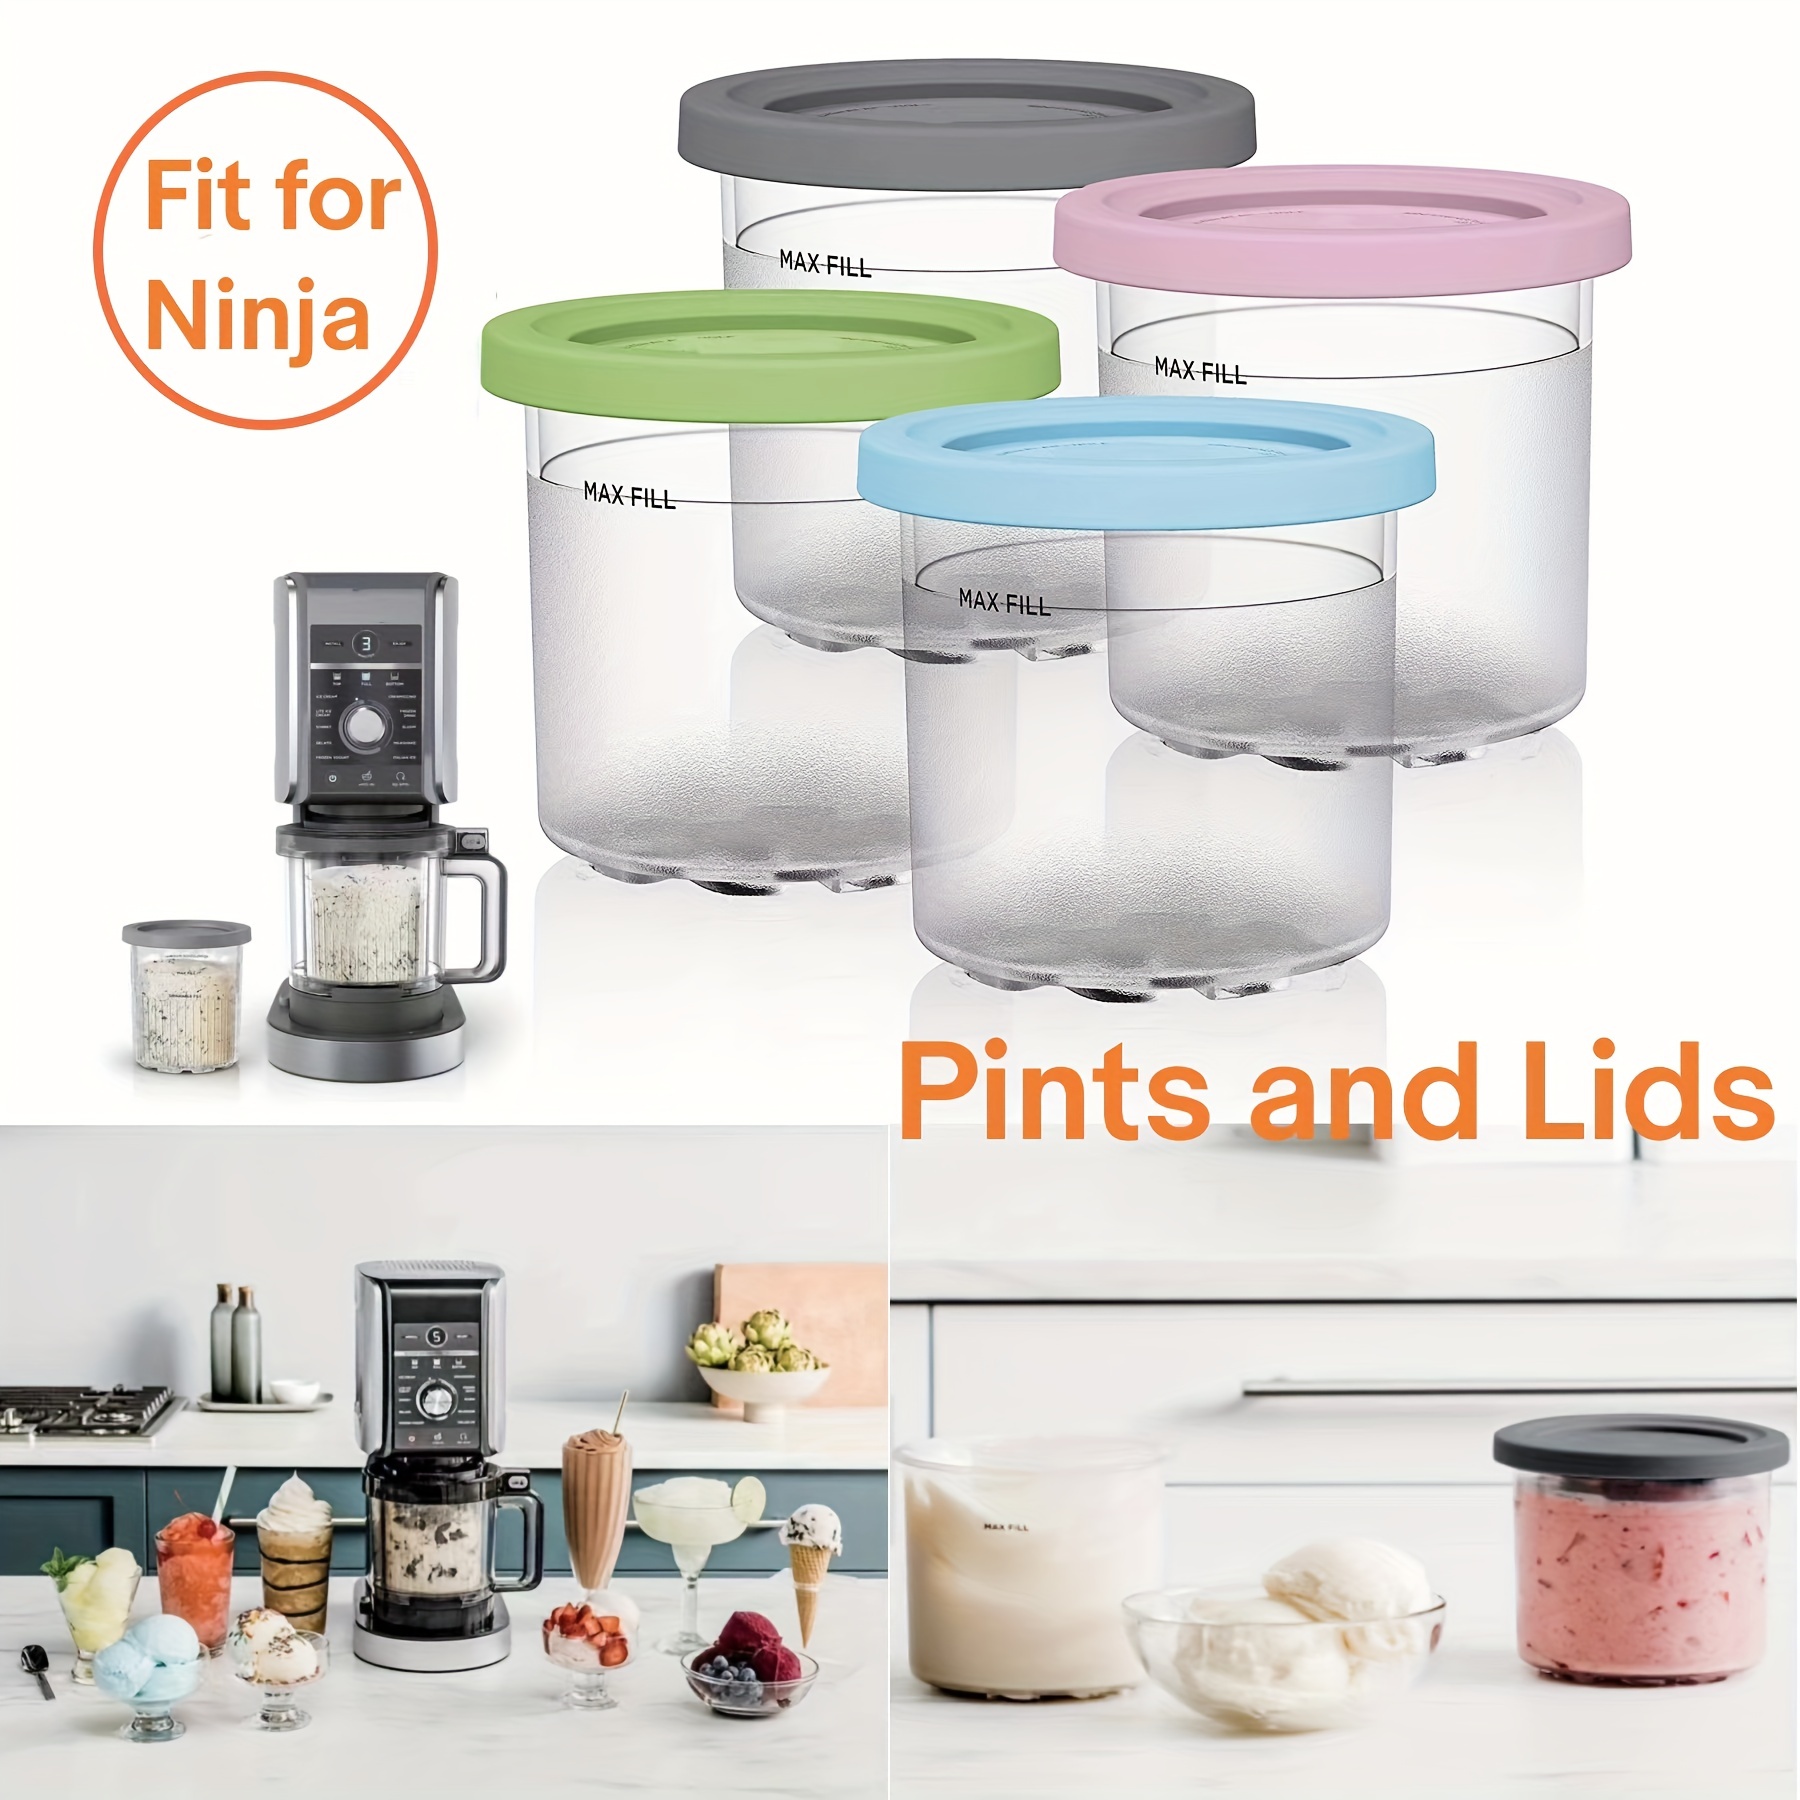 Pint Containers And Lids Replacement Compatible For Ninja Creami